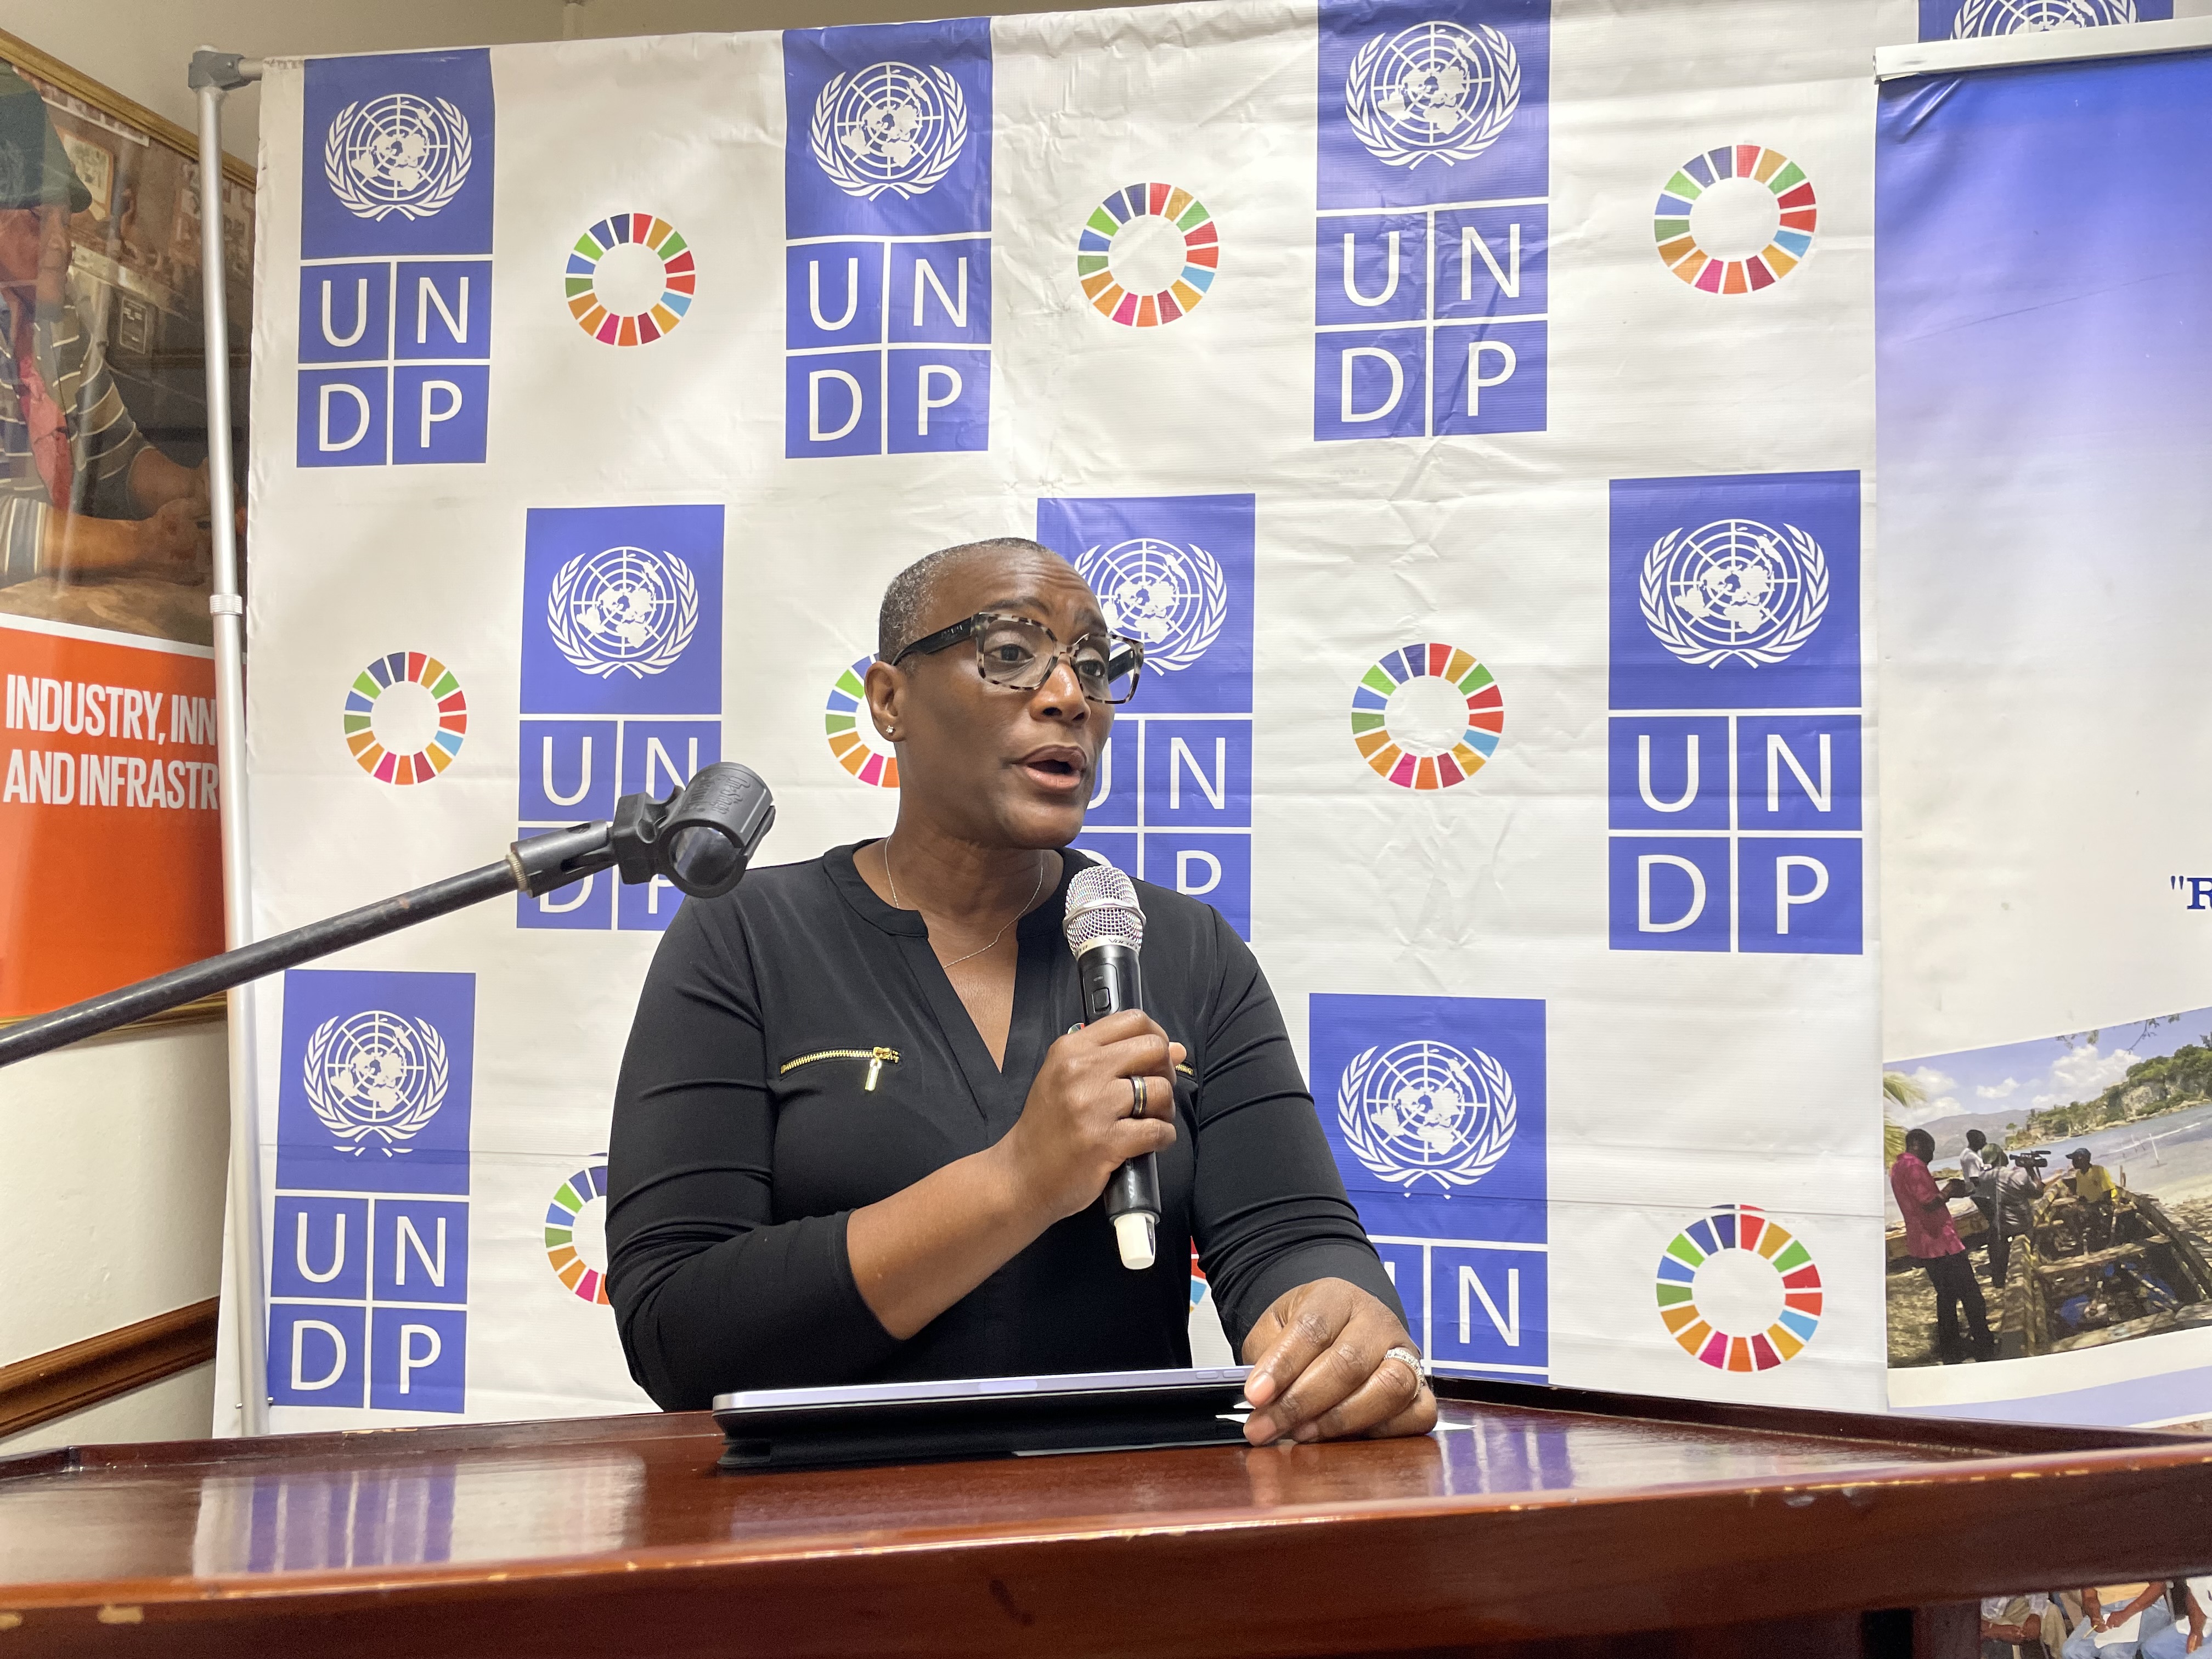 UNDP Res Rep speaking at World Environment Day event